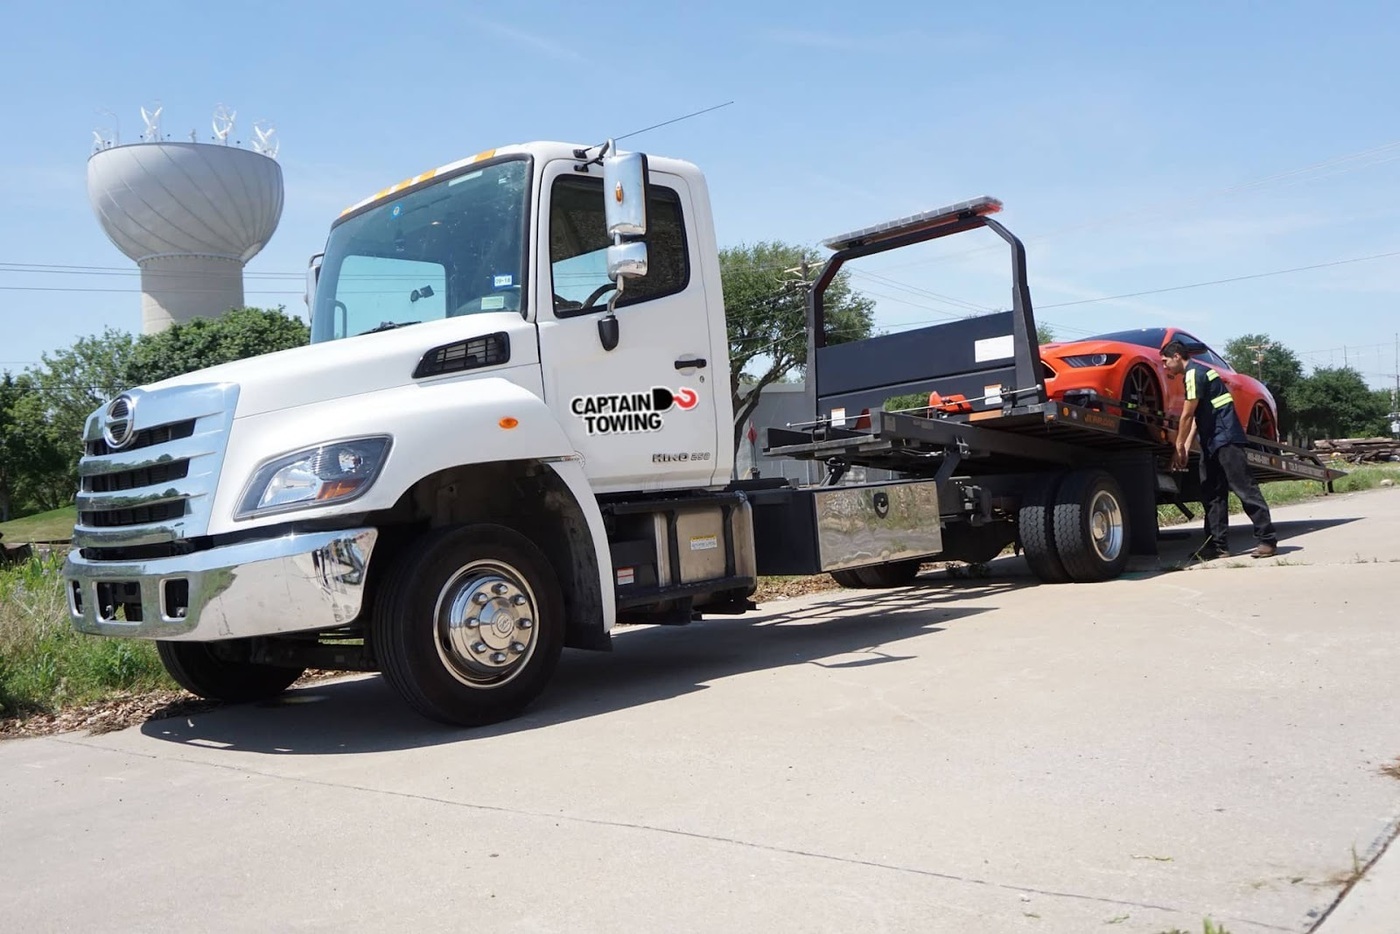 Captain Towing Dallas is a professional towing company in Dallas, TX. The company offers all kinds of auto towing services, car lockout services, roadside assistance, and emergency towing.